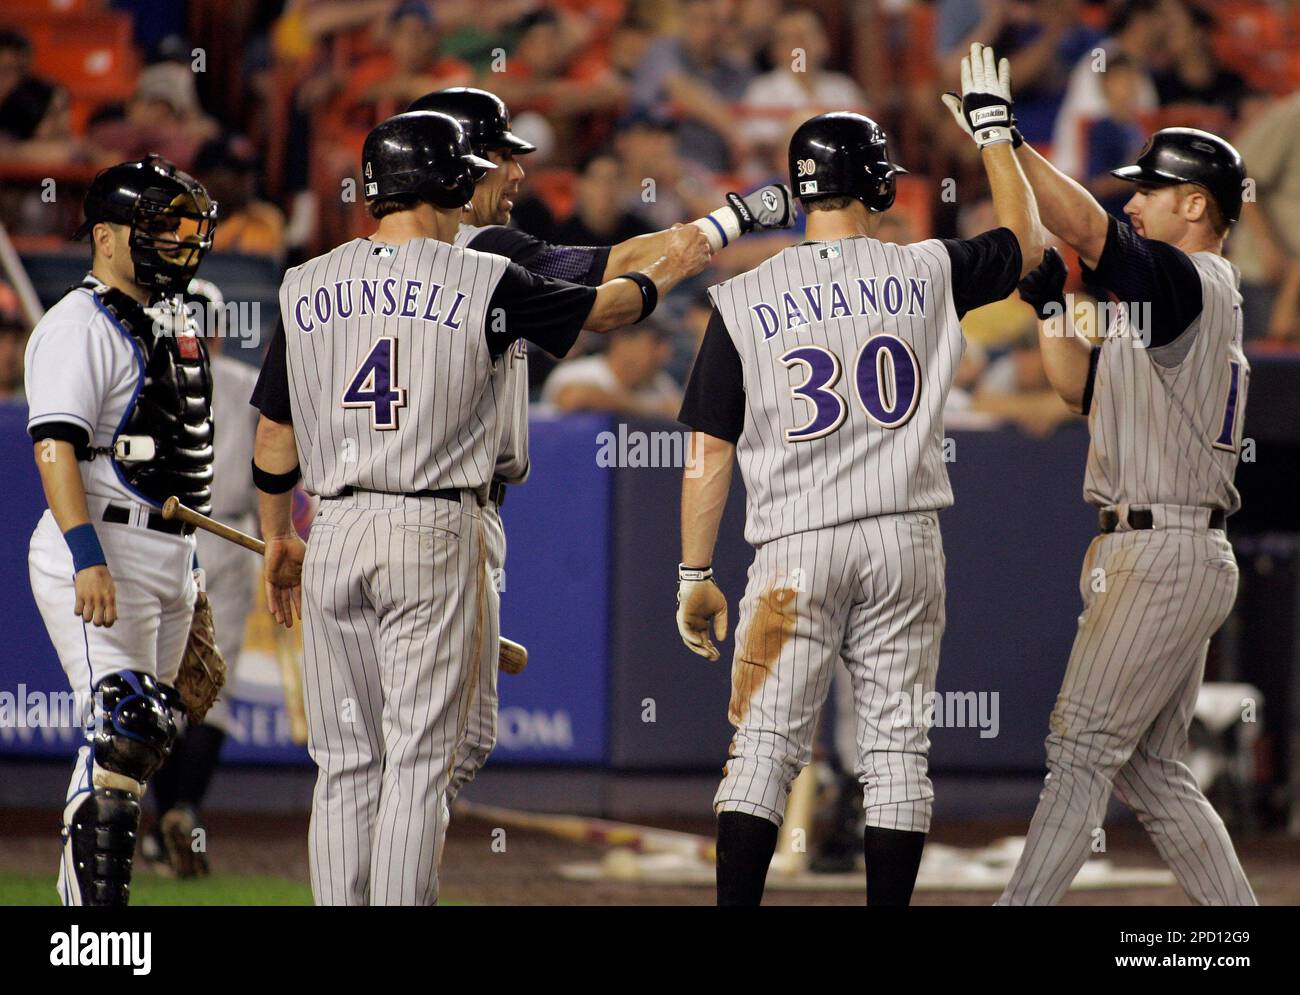 New York Mets catcher Paul Lo Duca watches as Arizona Diamondbacks Chad  Tracy is congratulated by Jeff DaVanon, Craig Counsell and Luis Gonzalez  after hitting a three run home run during the